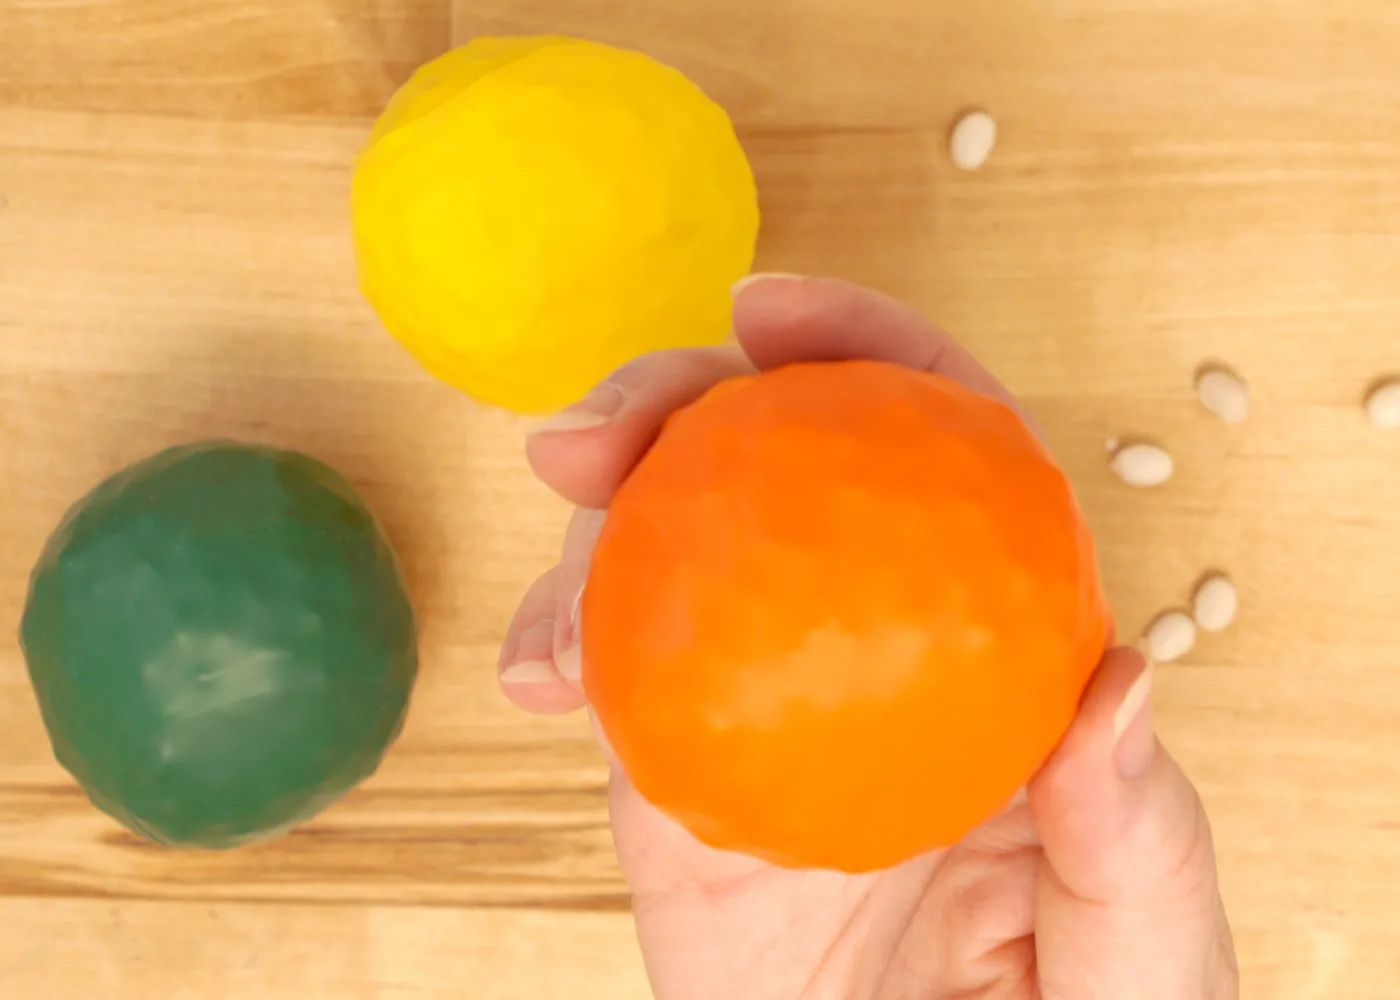 bean balls made of balloons in orange, yellow and green